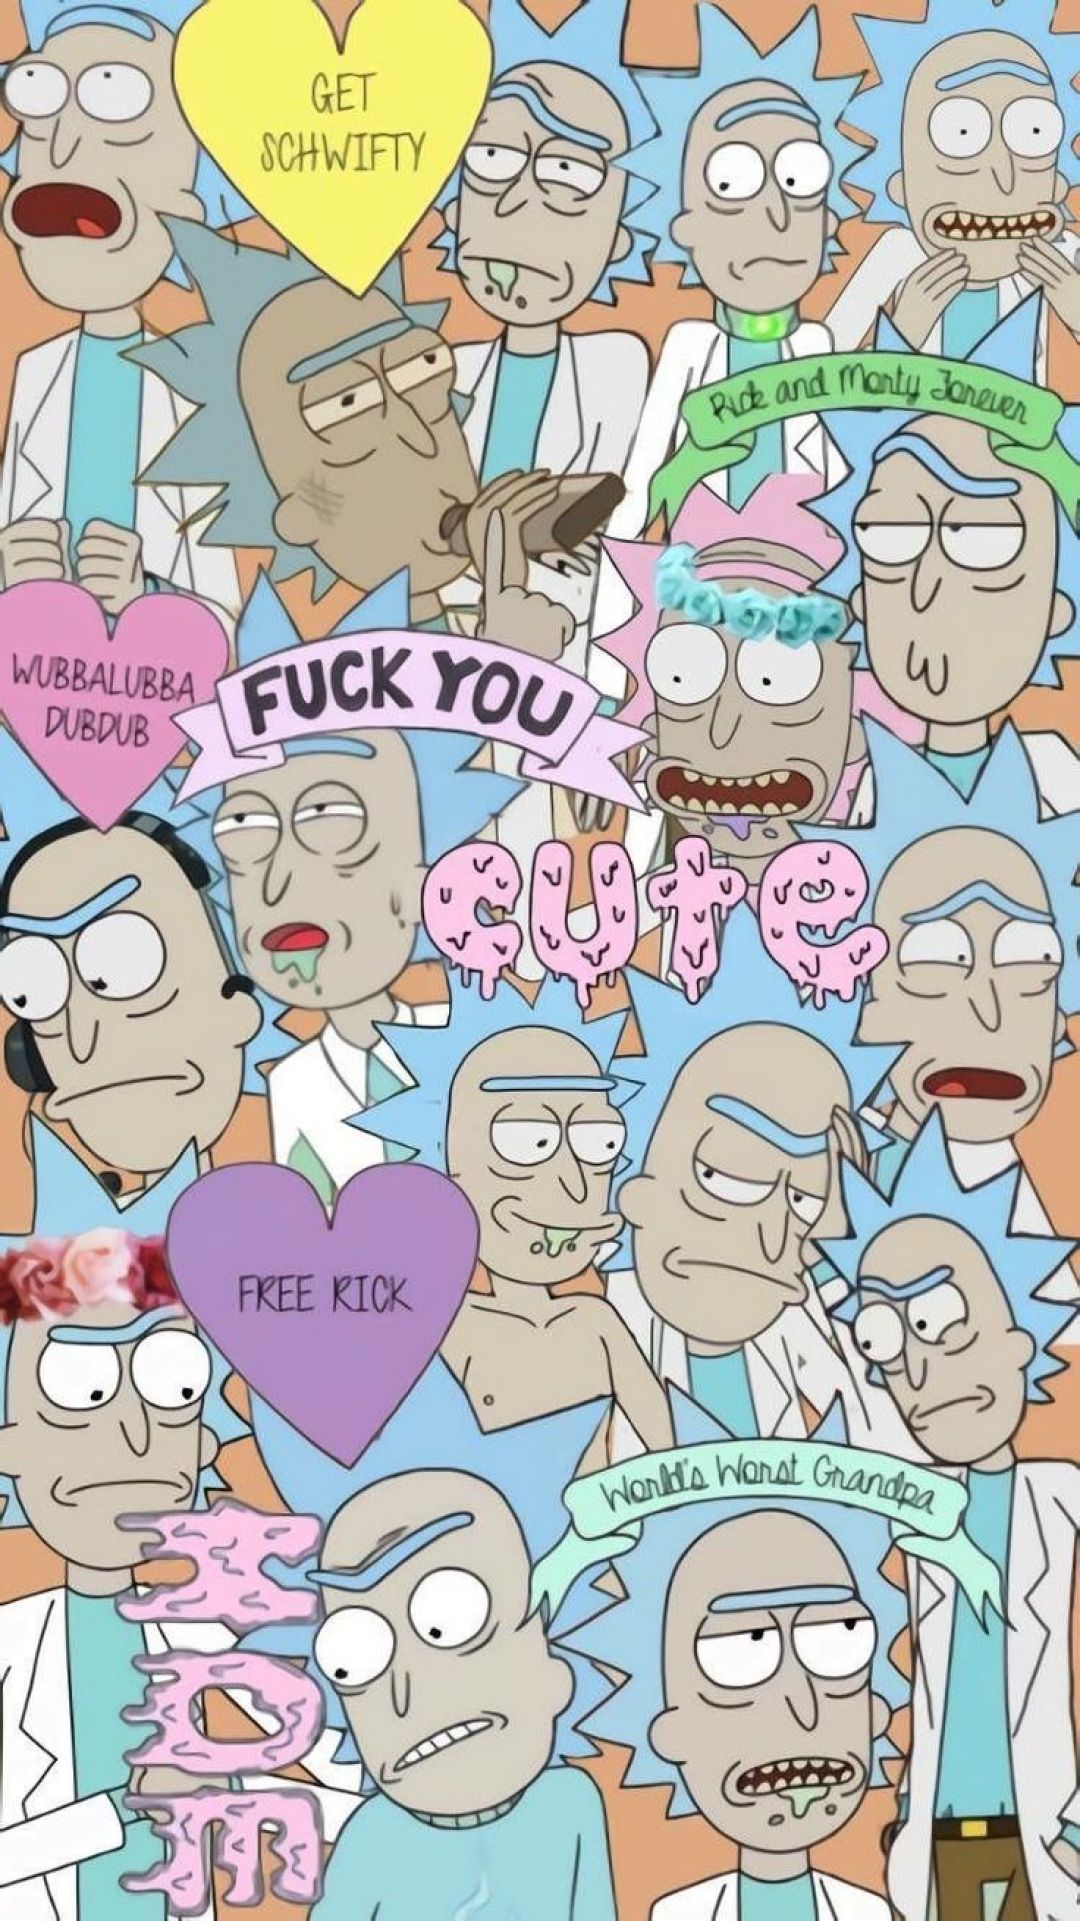 Android, Iphone, Desktop Hd Backgrounds / Wallpapers - Rick And Morty Wallpaper Funny - HD Wallpaper 